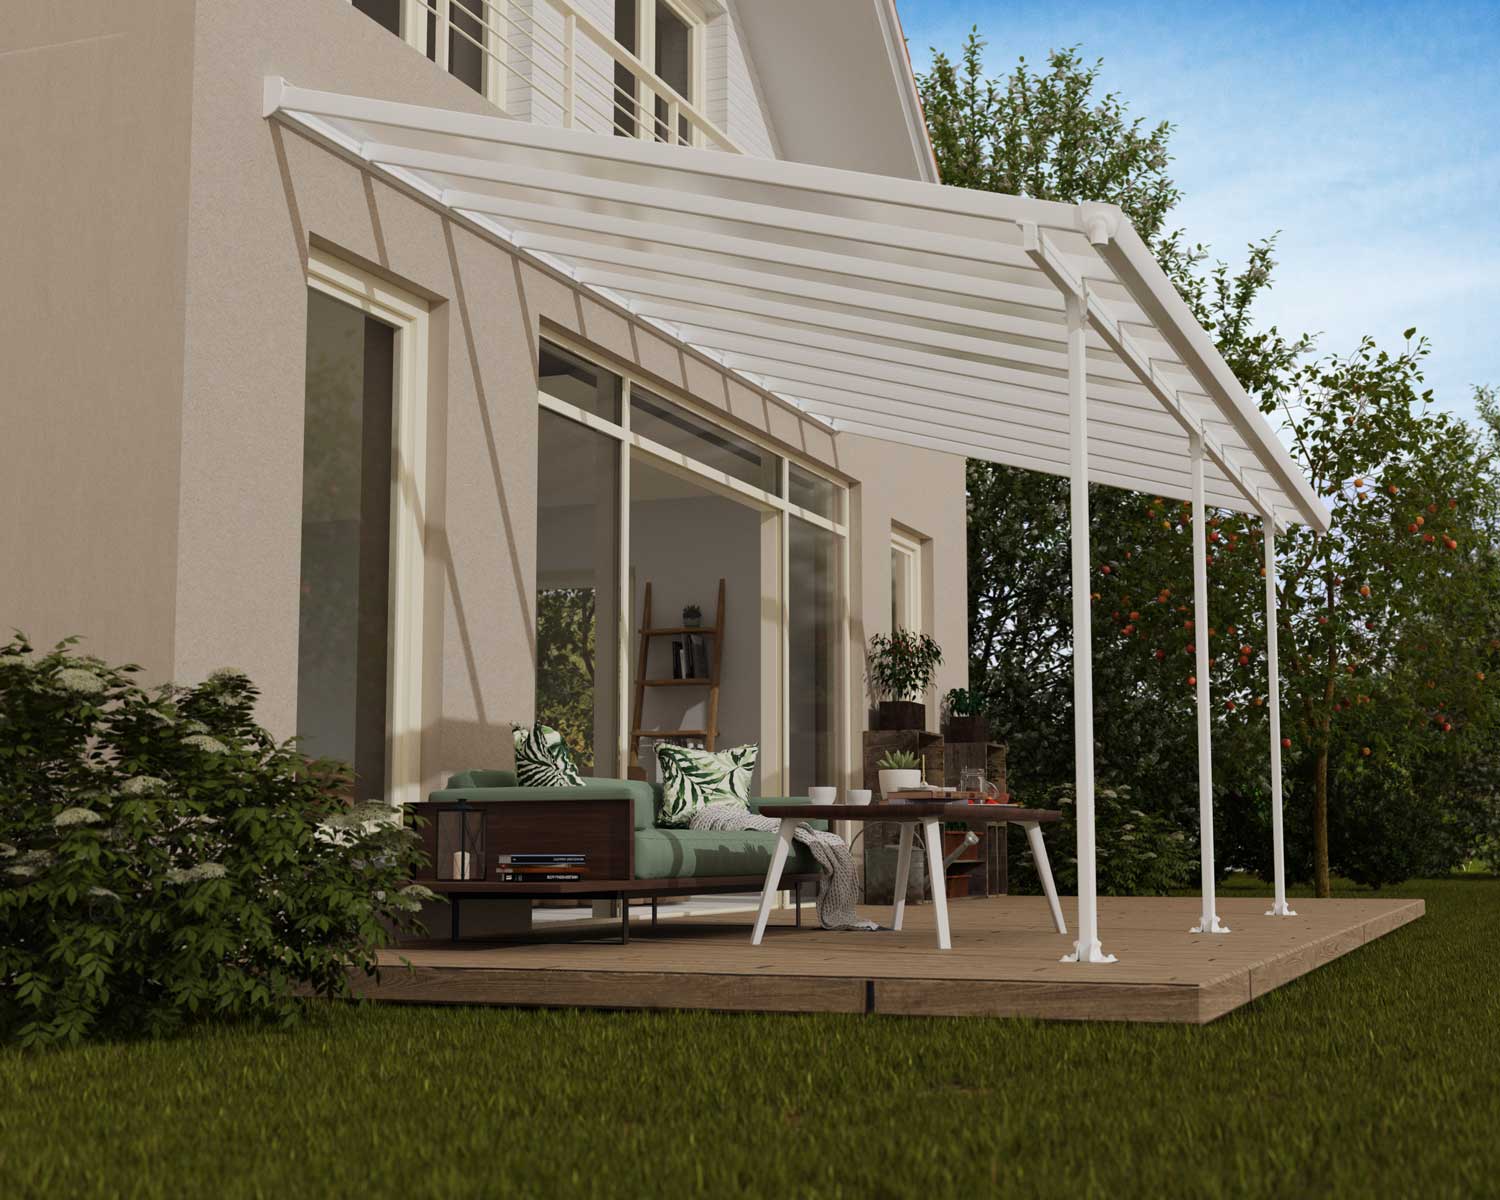 Aluminium White Patio Cover 10 ft. x 20 ft. with polycarbonate roof panels, attached to the house to protect patio furniture